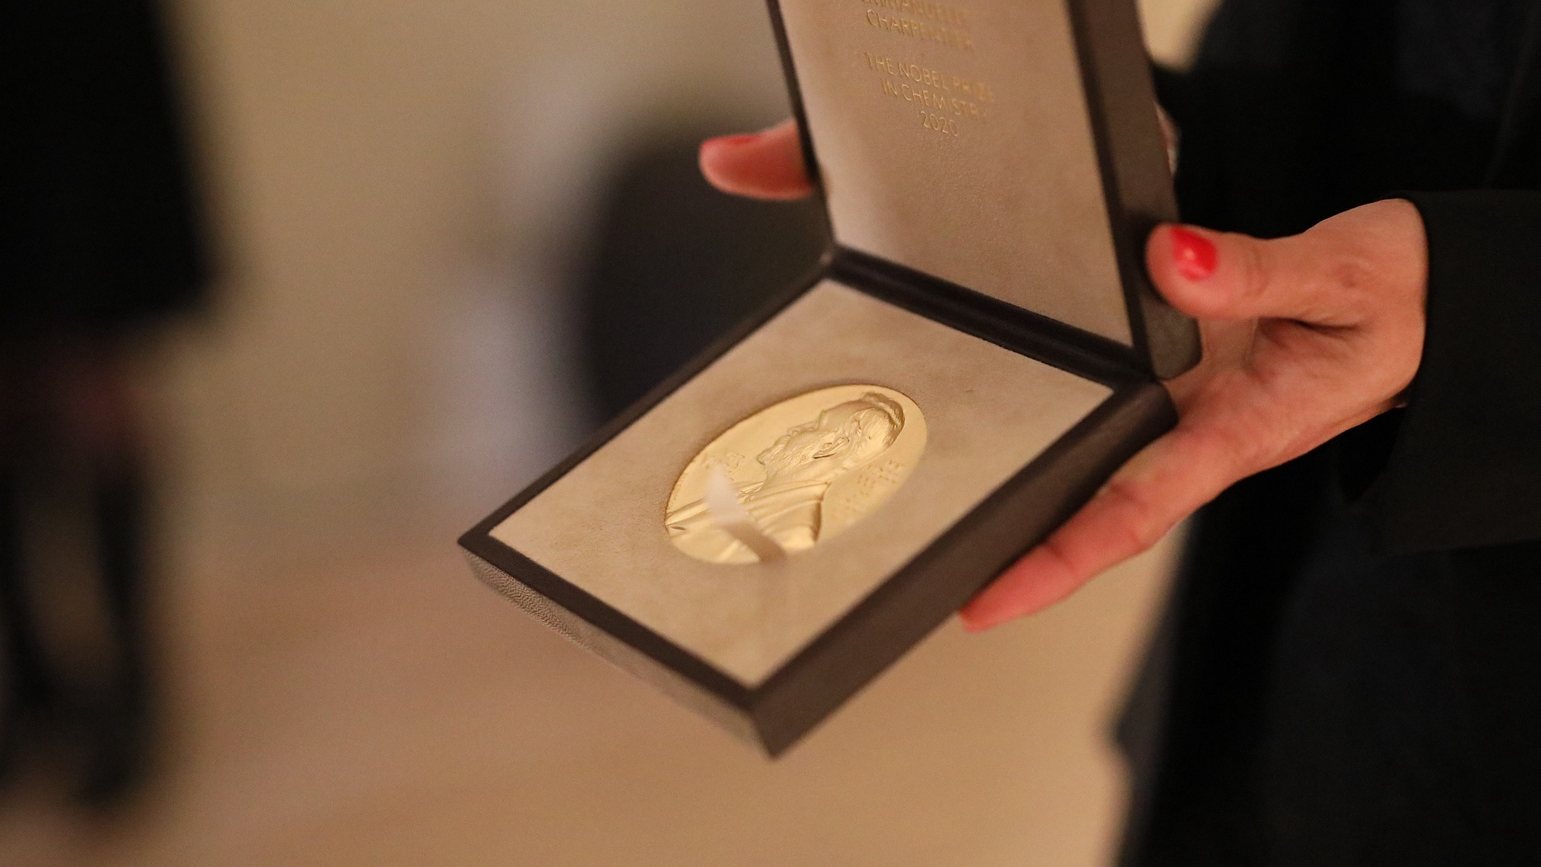 epa08869369 A handout photo made available by The Nobel Prize shows the Nobel Prize medal and diploma being presented to chemistry laureate Emmanuelle Charpentier at the Swedish Ambassador&#039;s Residence in Berlin, Germany, 07 December 2020.  EPA/BERNHARD LUDEWIG / THE NOBEL PRIZE HANDOUT MANDATORY CREDIT: THE NOBEL PRIZE HANDOUT EDITORIAL USE ONLY/NO SALES